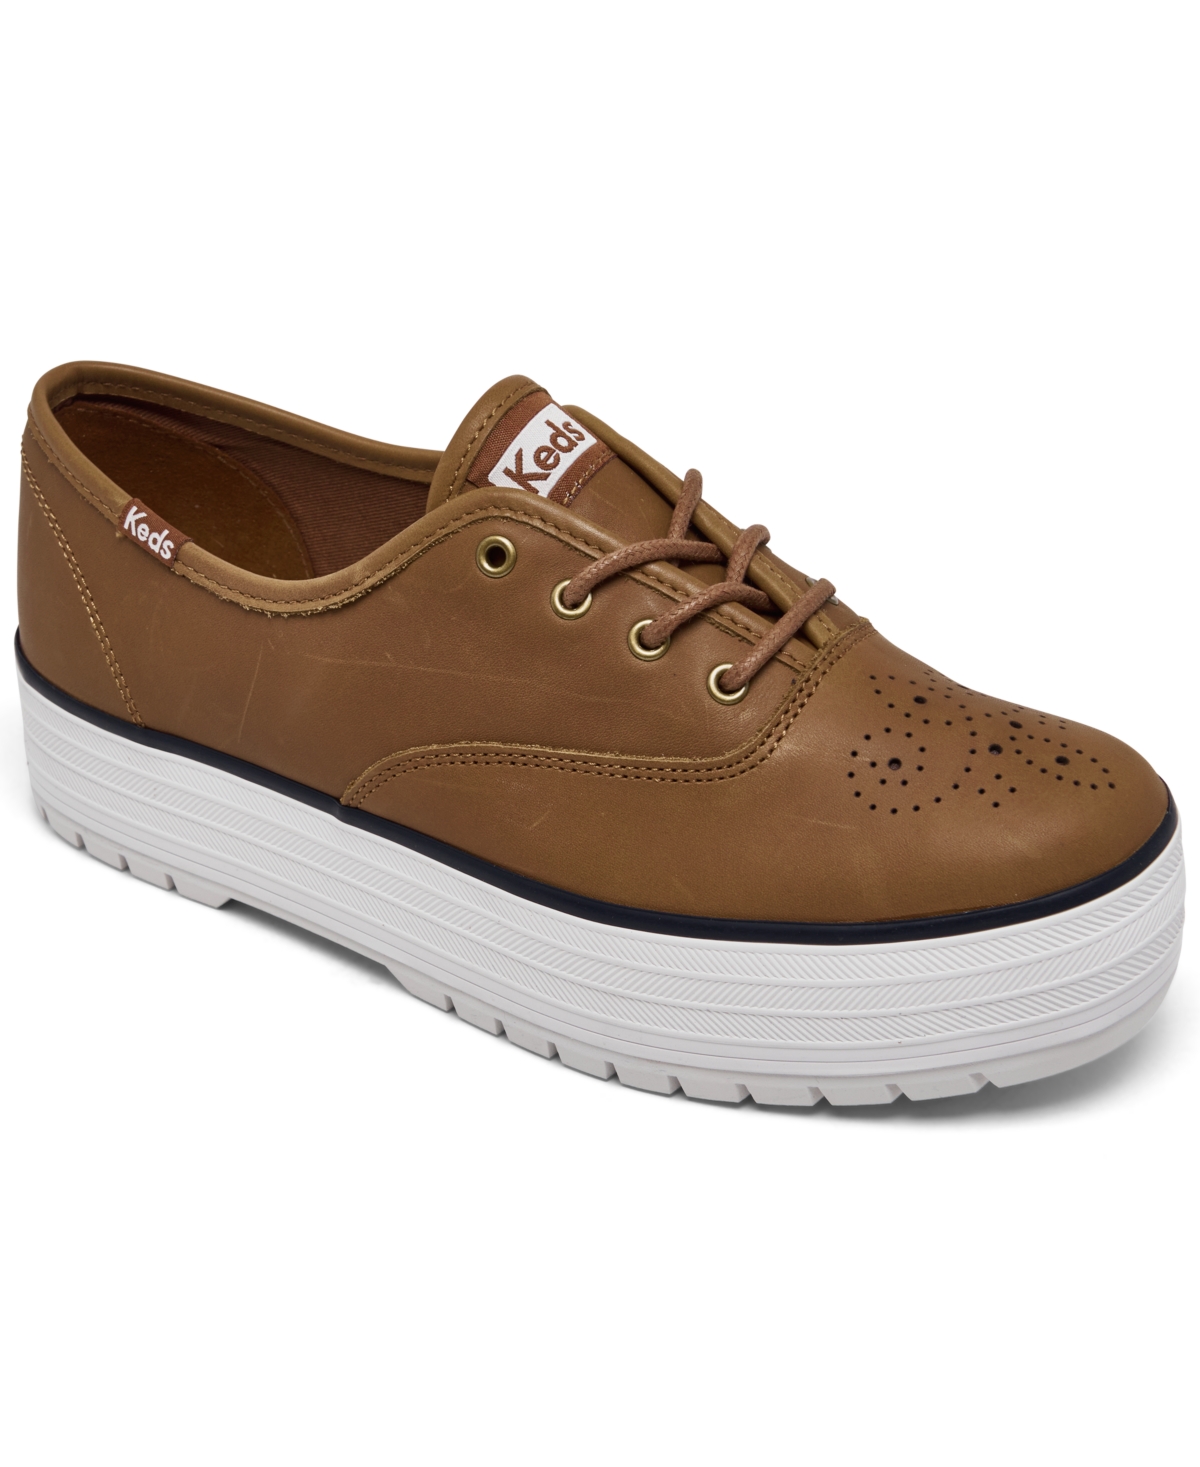 Keds Women's Broguing Platform Lug Leather Casual Shoes From Finish Line In Cognac